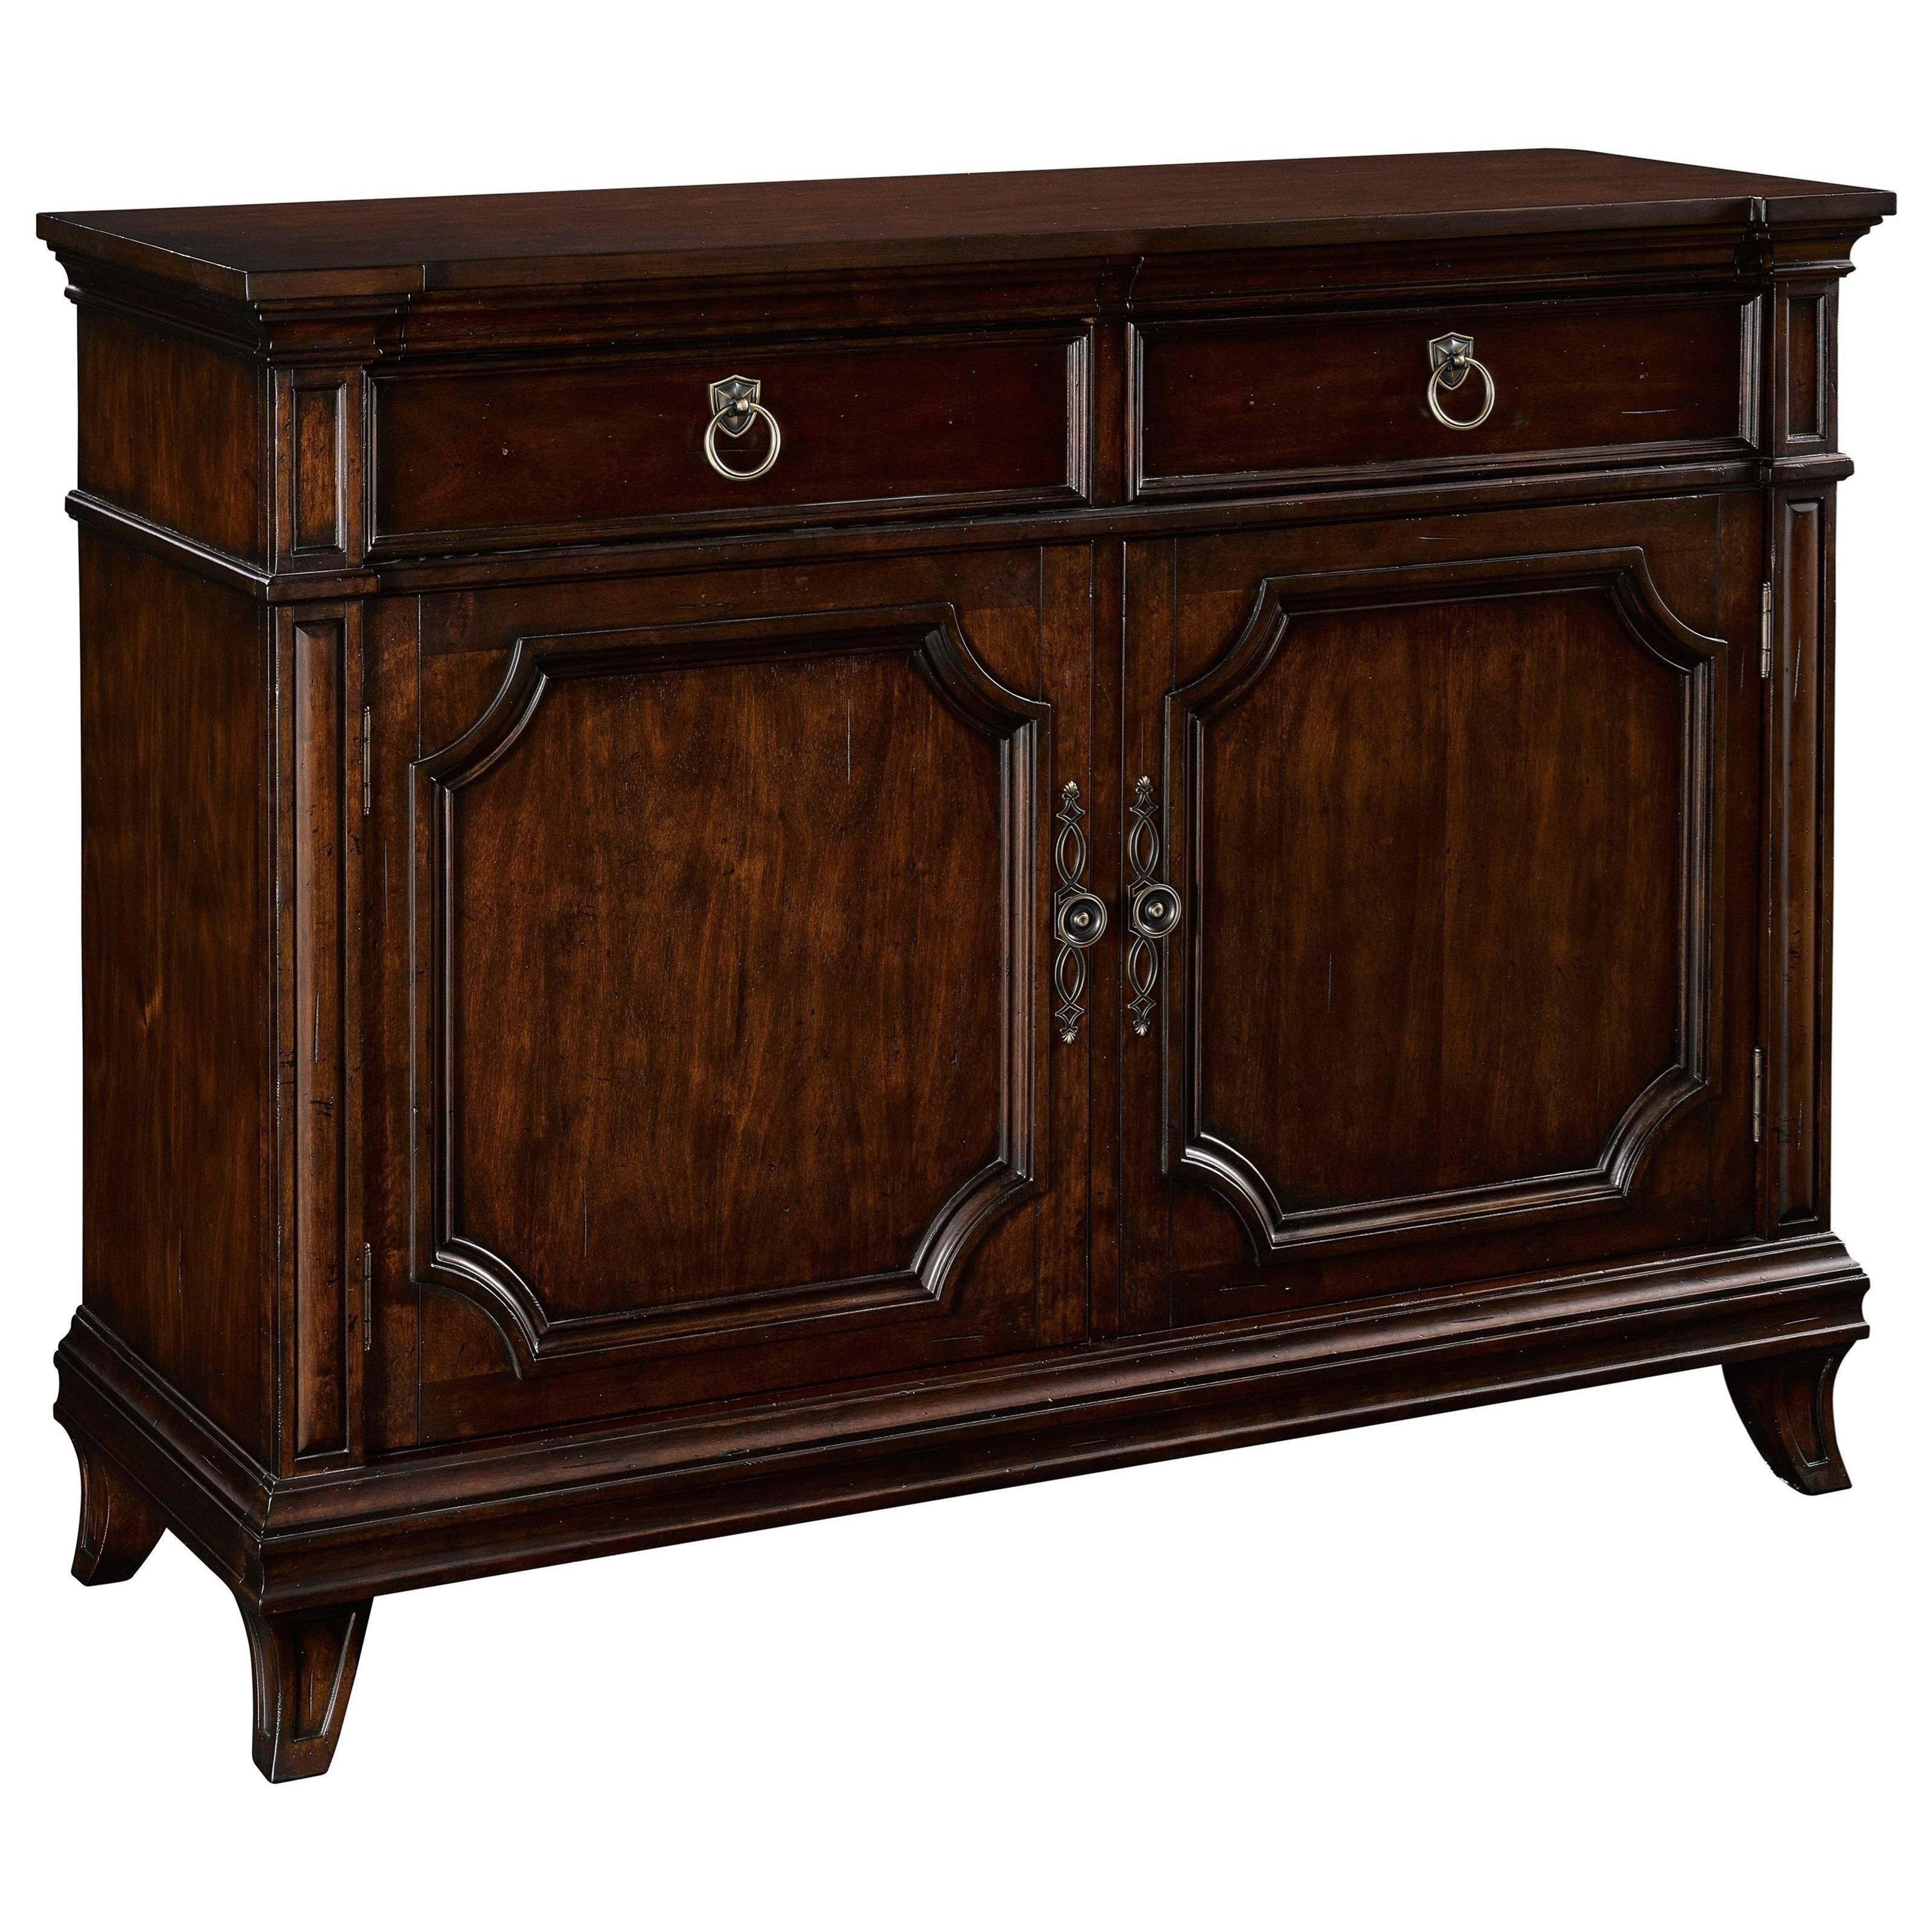 Broyhill Furniture New Charleston Traditional Sideboard With 2 Intended For Latest Diamond Circle Sideboards (View 13 of 20)